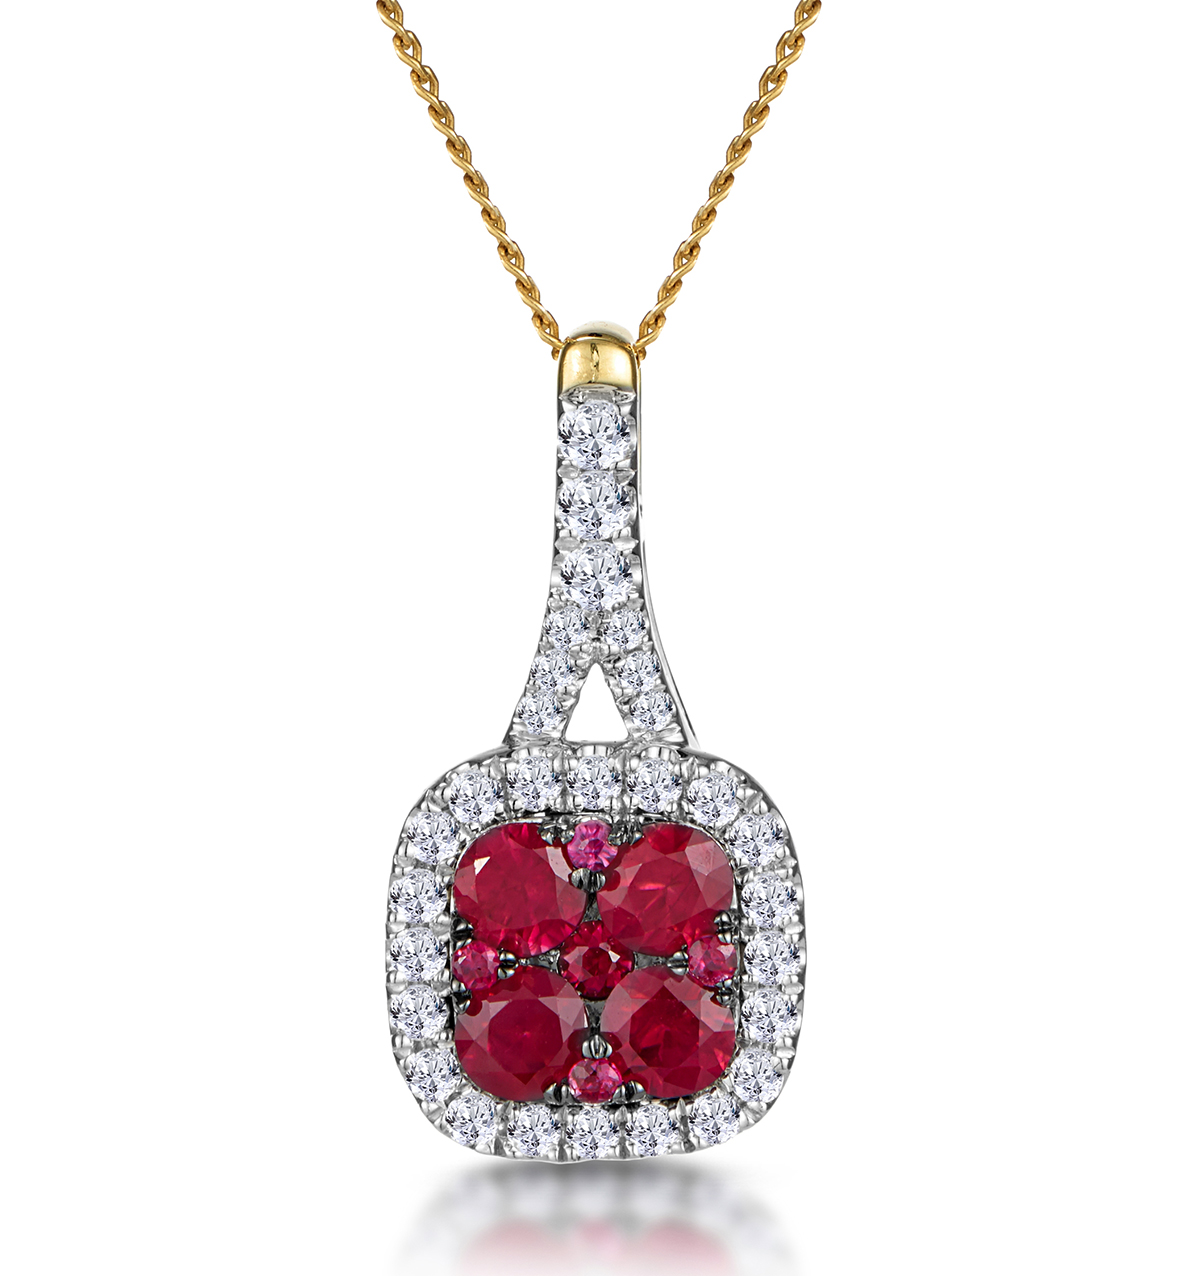 10k White Gold Genuine Oval 1.20ct Ruby and Diamond Halo Necklace 